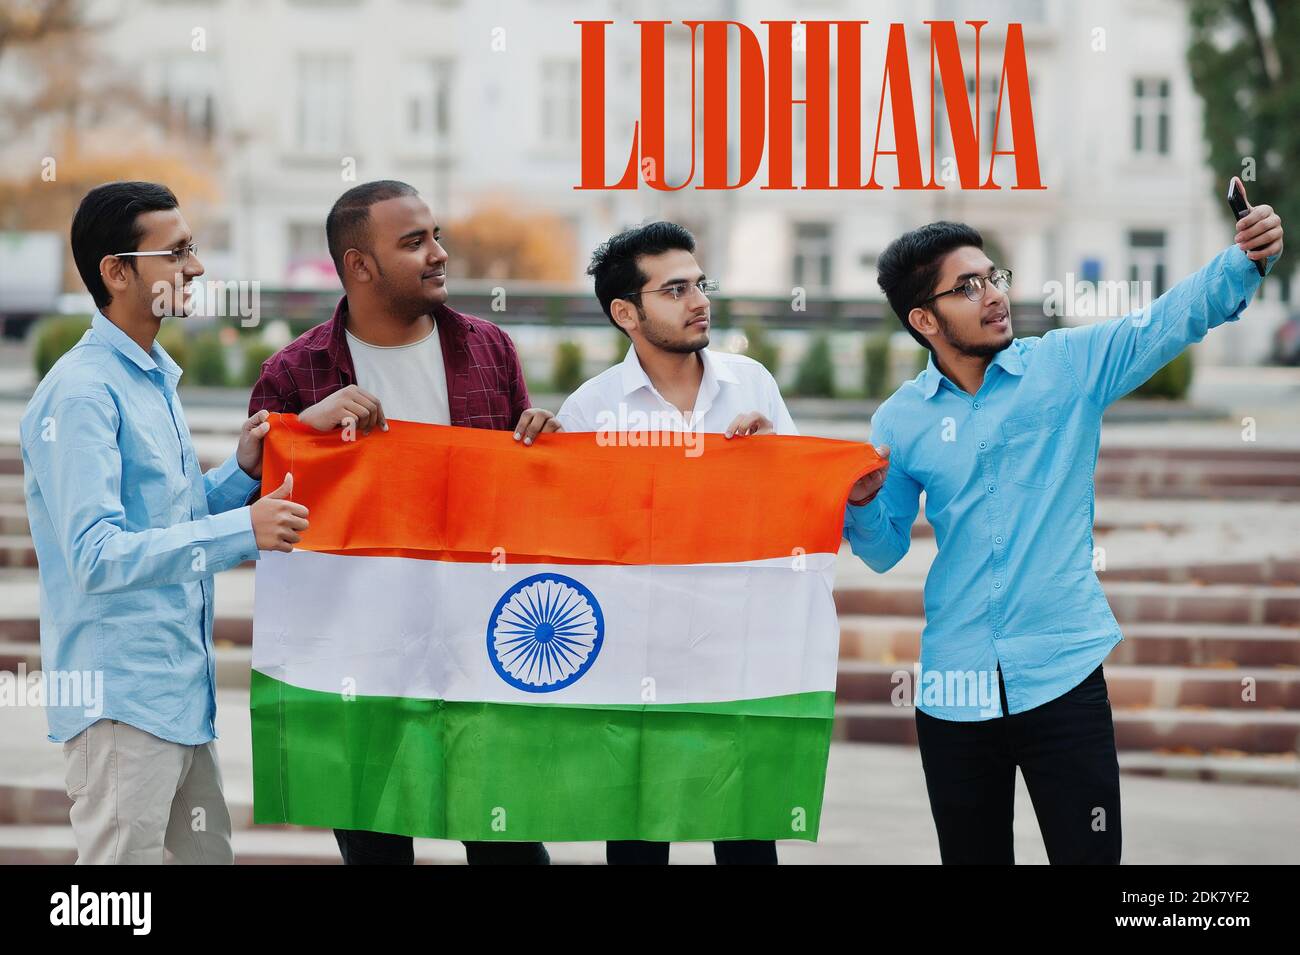 Ludhiana city inscription. Group of four indian male friends with India flag making selfie on mobile phone. Largest India cities concept. Stock Photo